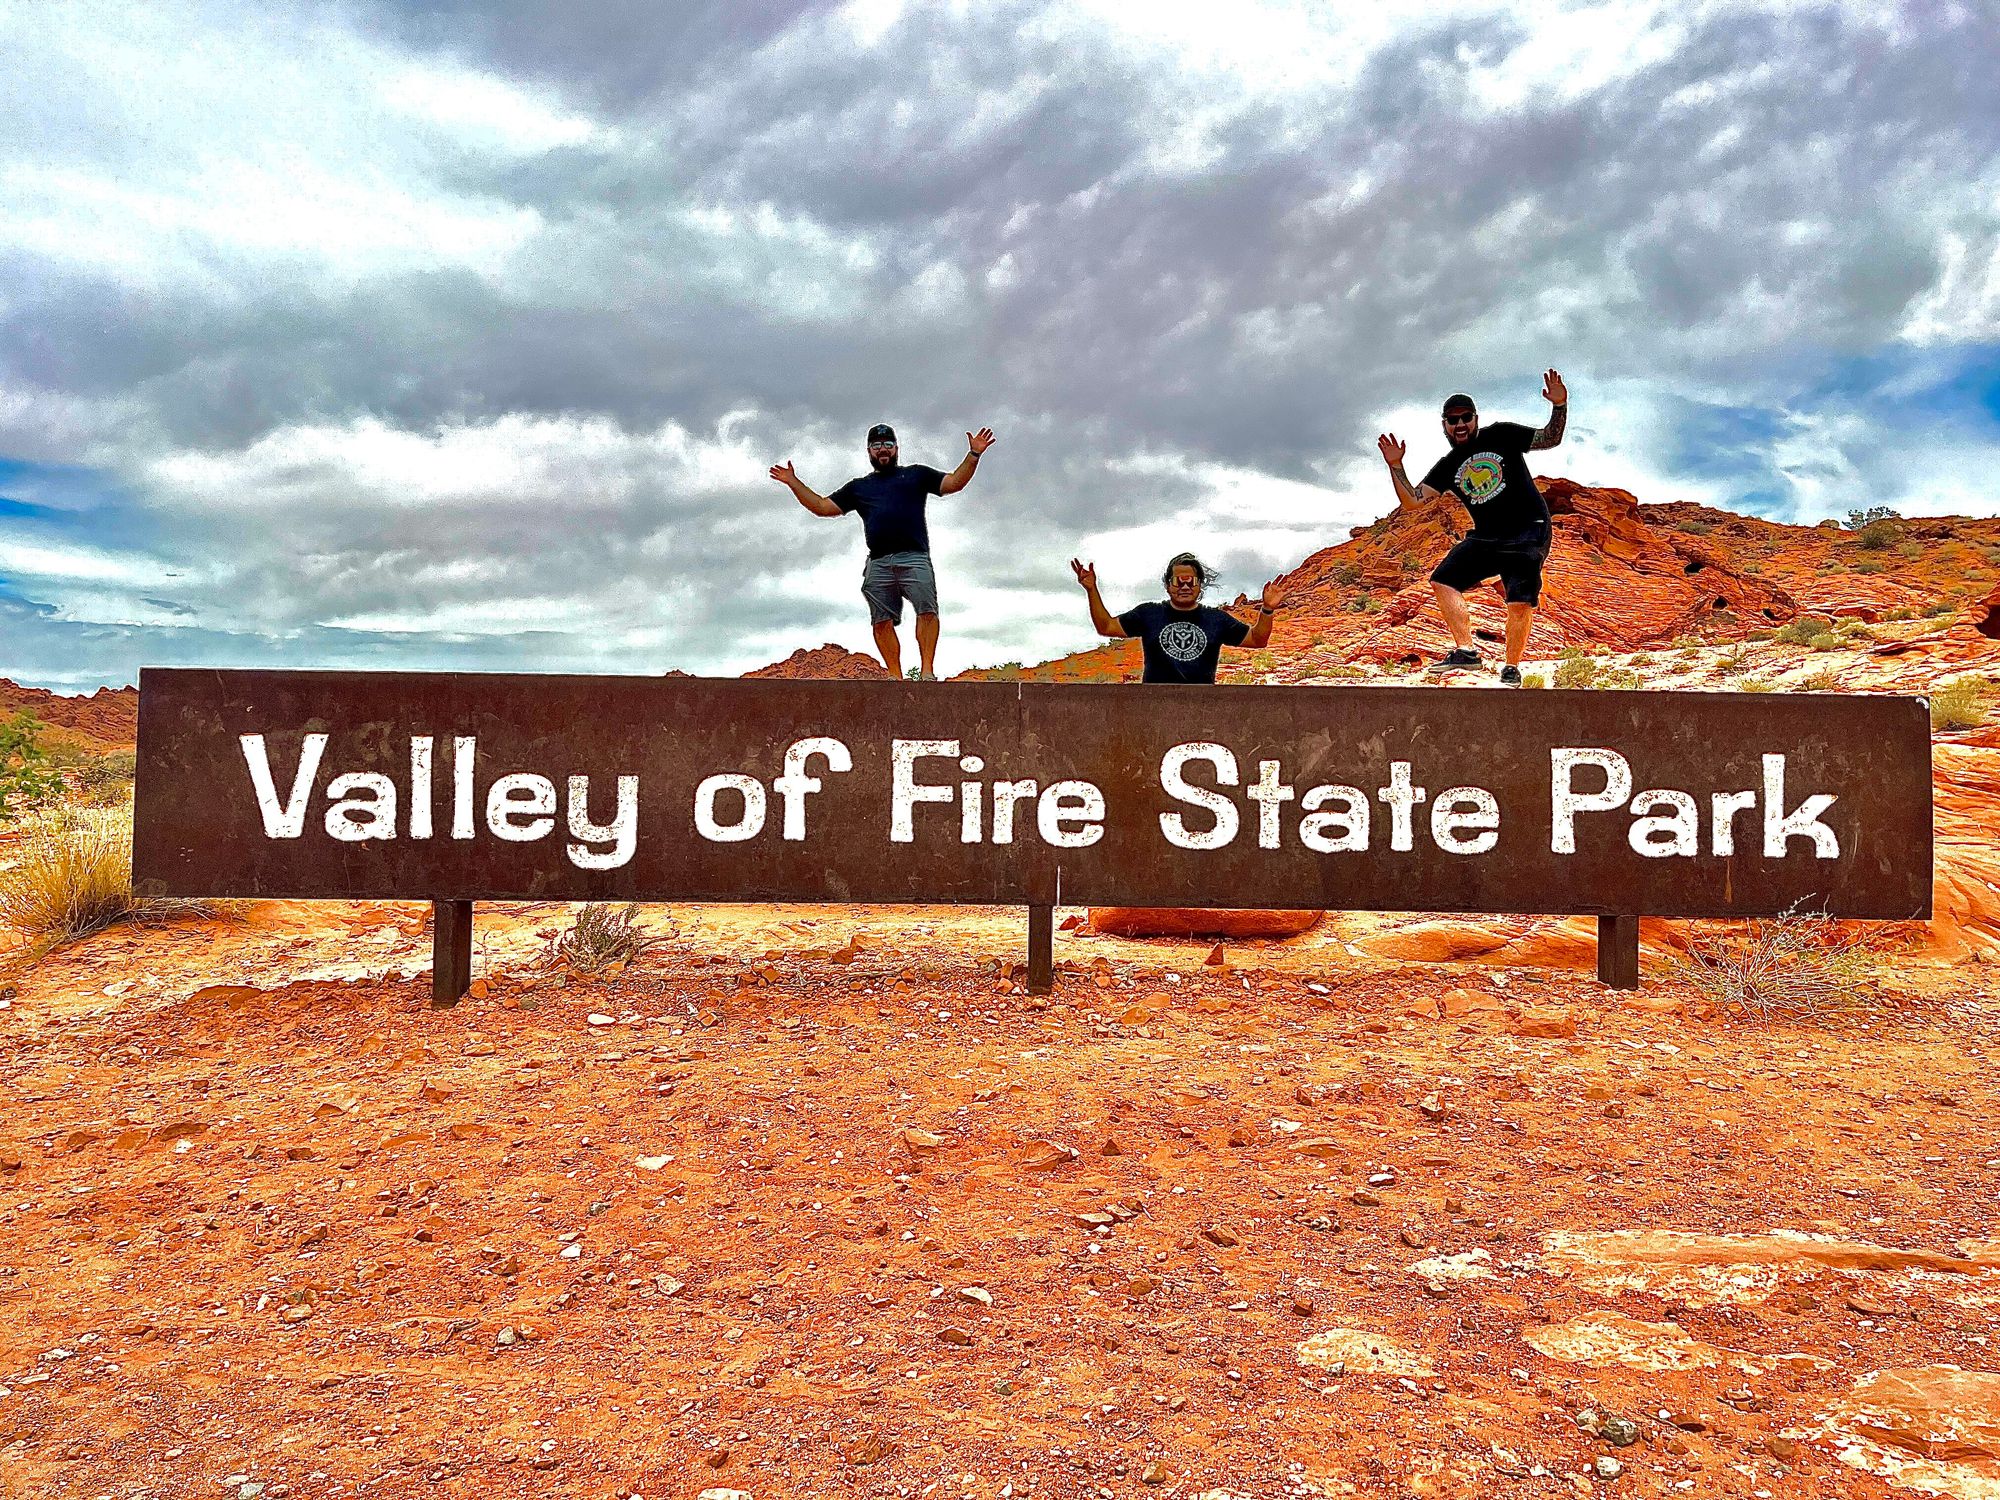 3 SpotOn employees at Valley of Fire State Park